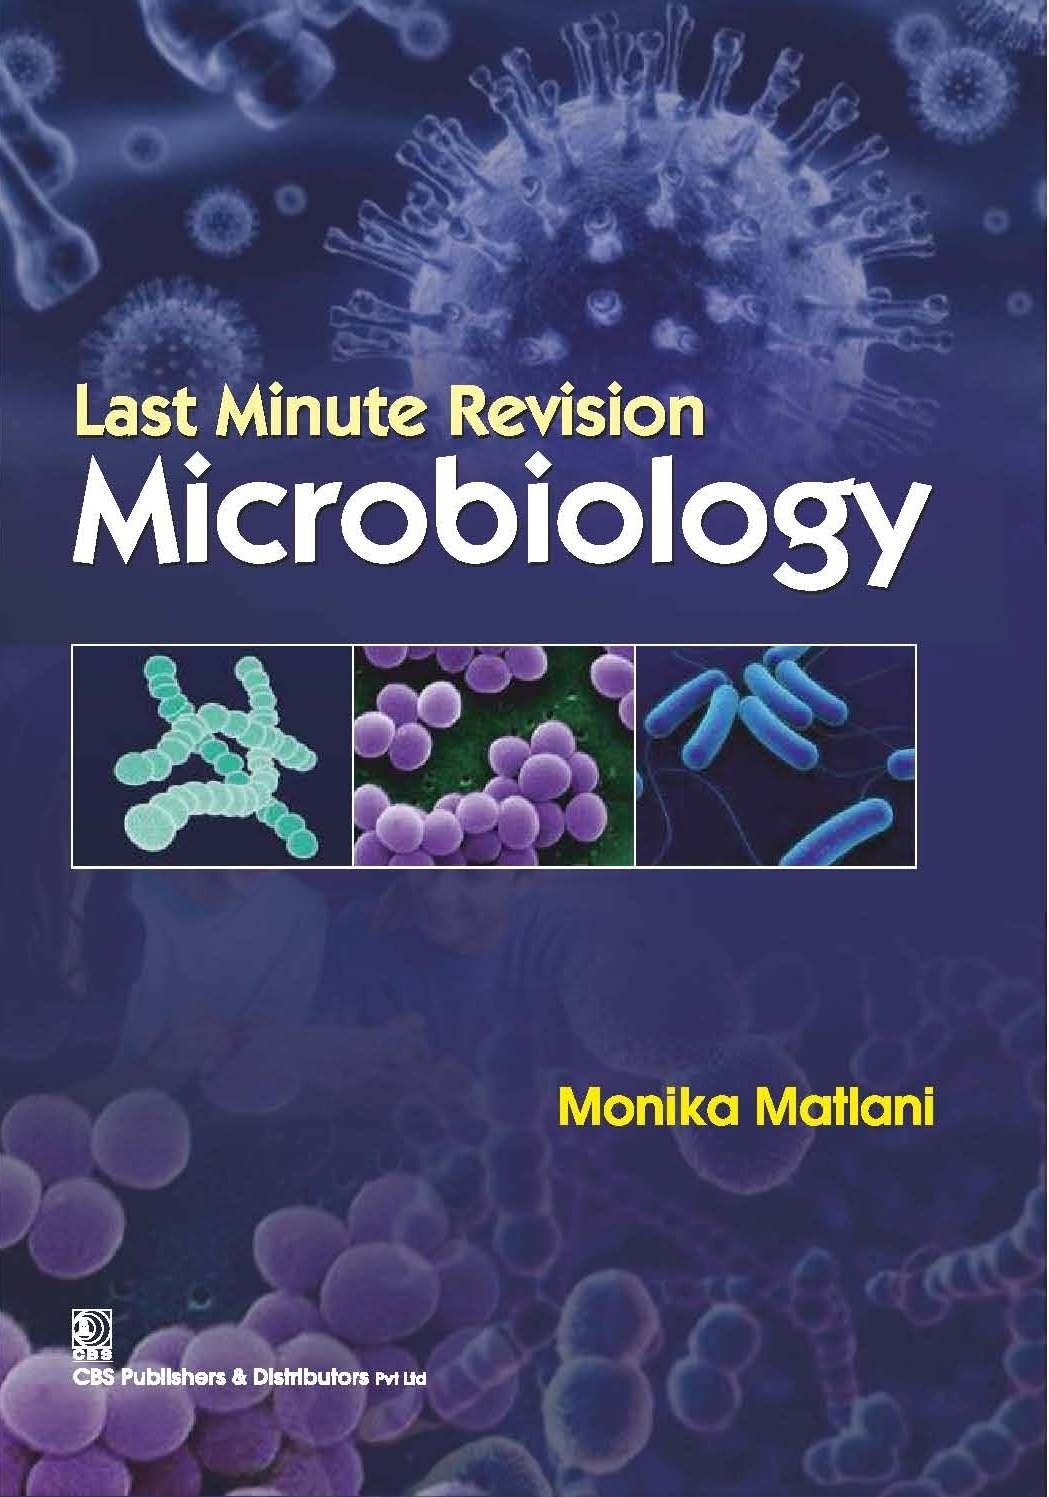 Last Minute Revision Microbiology